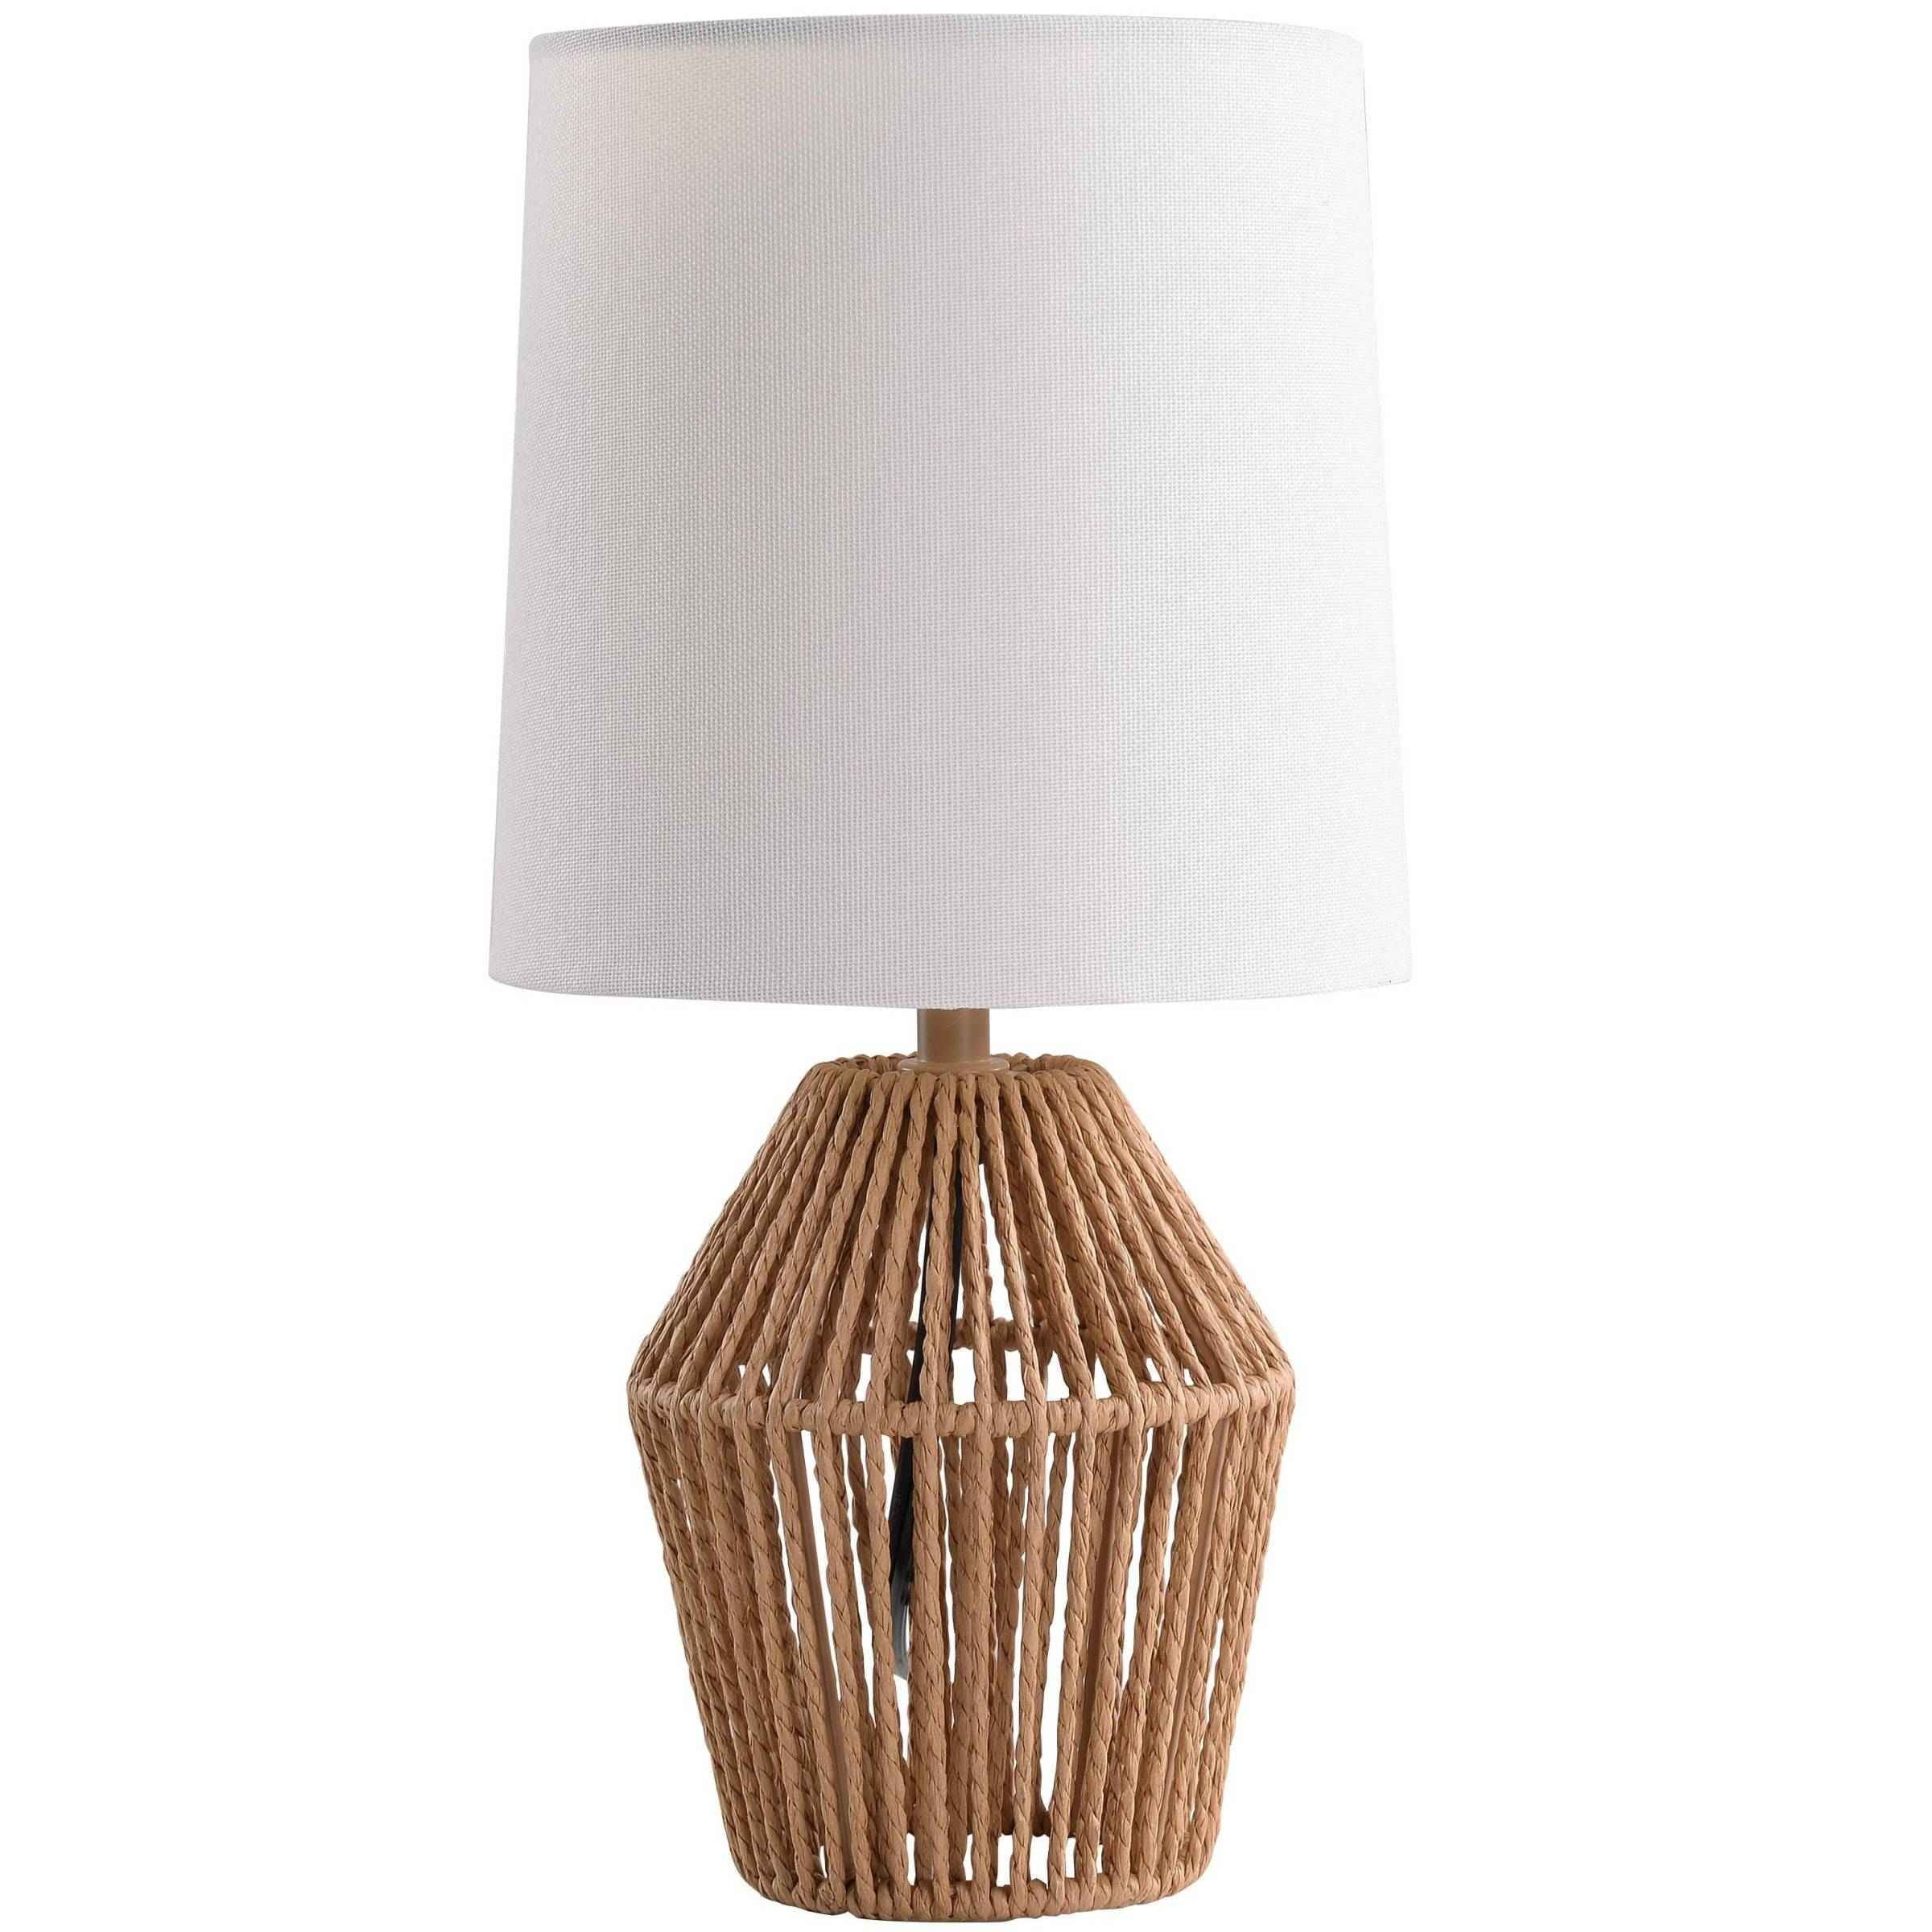 Mainstays Mini Rattan Table Lamp with Shade 12.75"H- Natural Color Finish and Boho Style